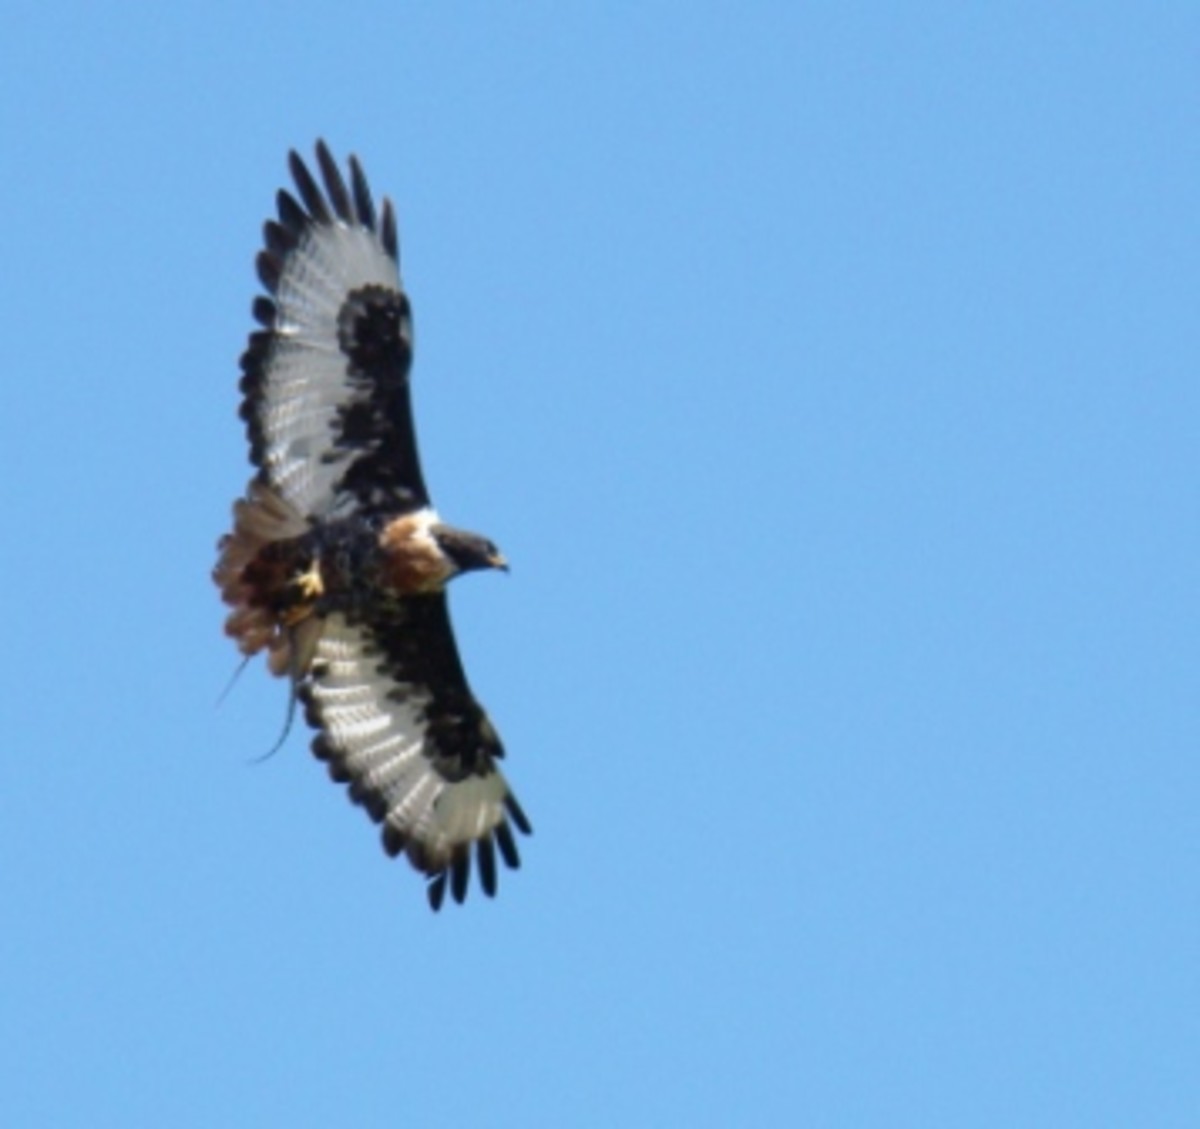 Raptors of the Eastern Cape-South Africa-May 2014 as winter comes.